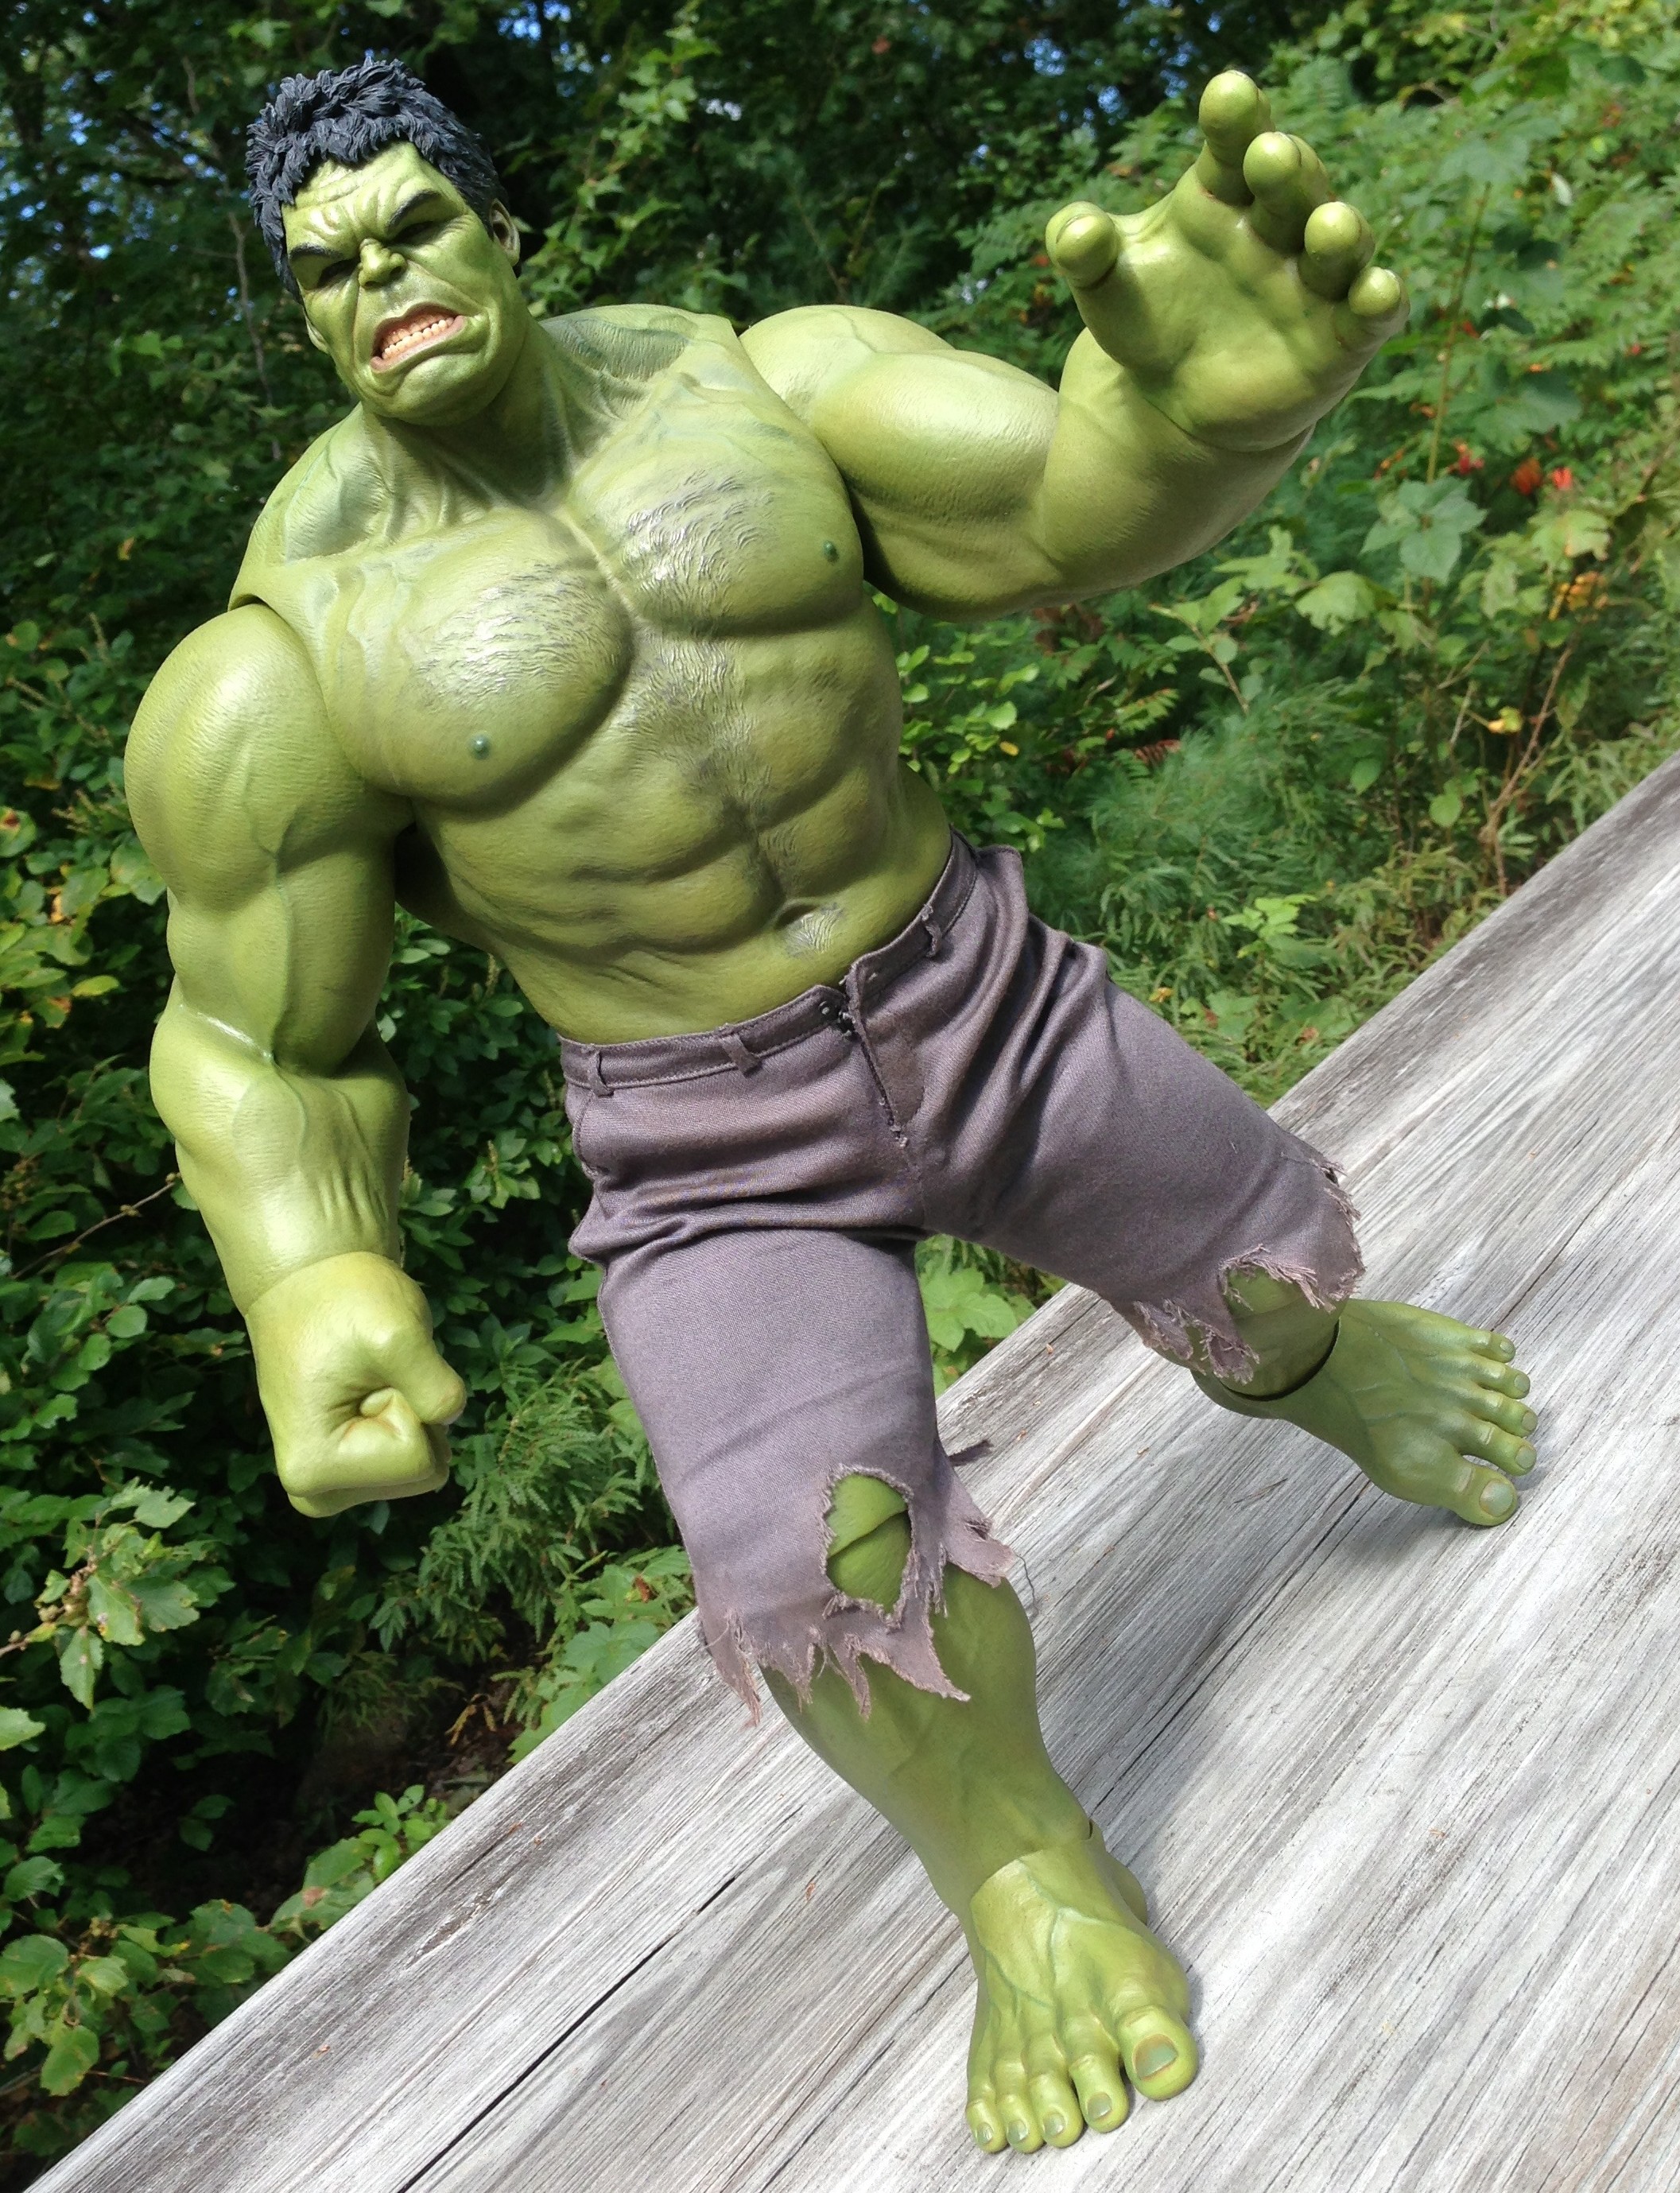 Hot Toys Hulk Review Avengers 1:6 Scale Figure MMS 186 - Marvel 